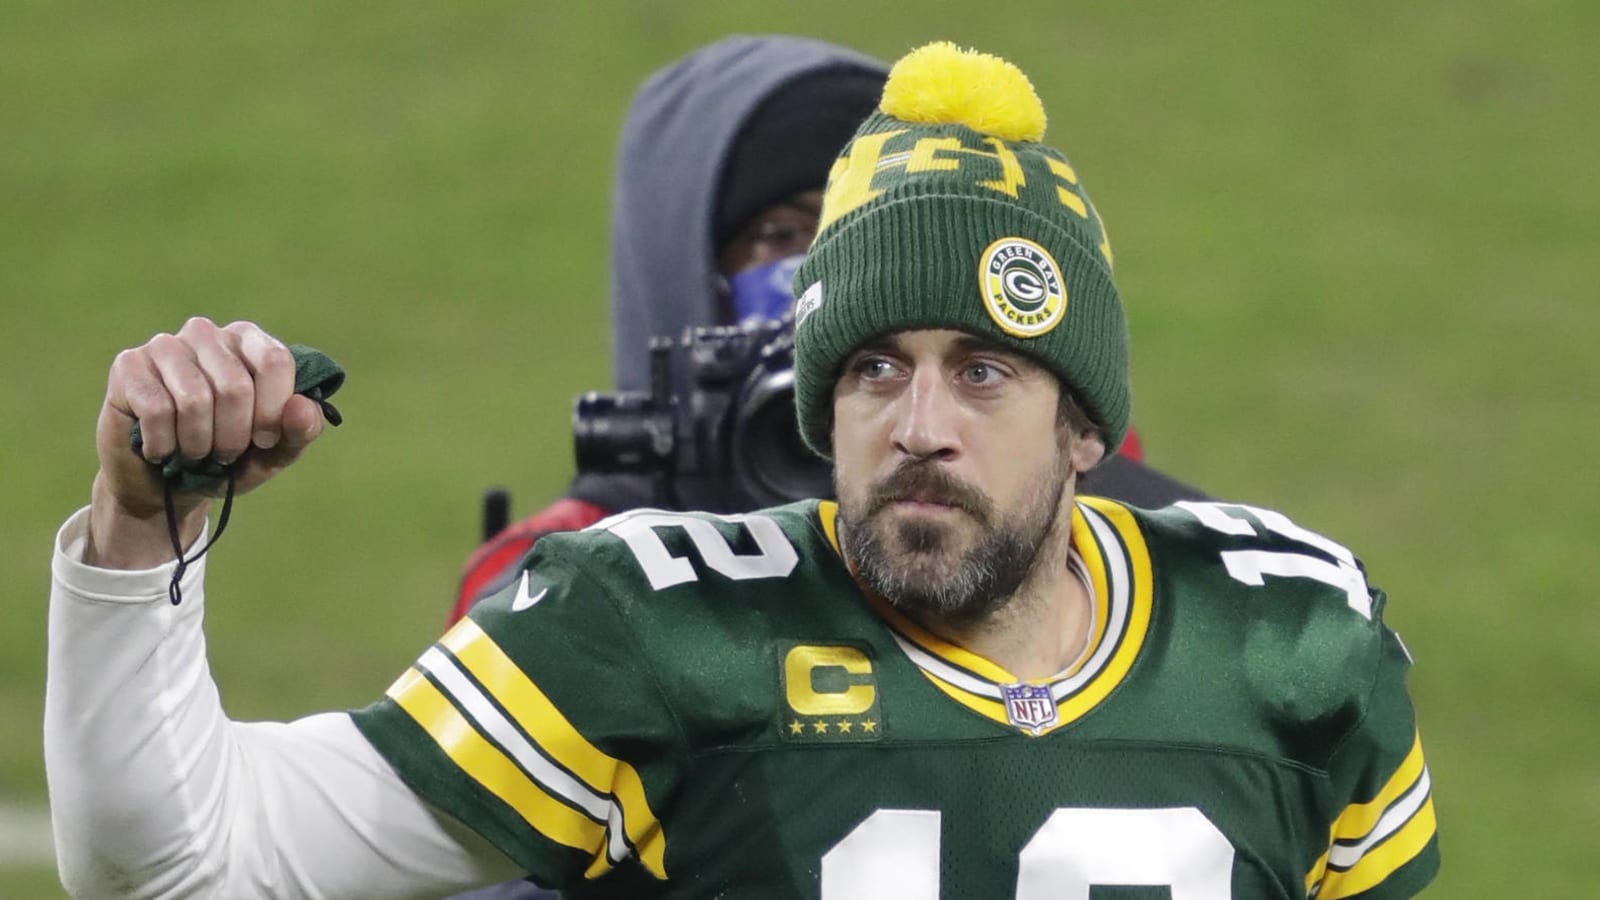 Aaron Rodgers weighs in on viral video of him with beer case in pickup truck